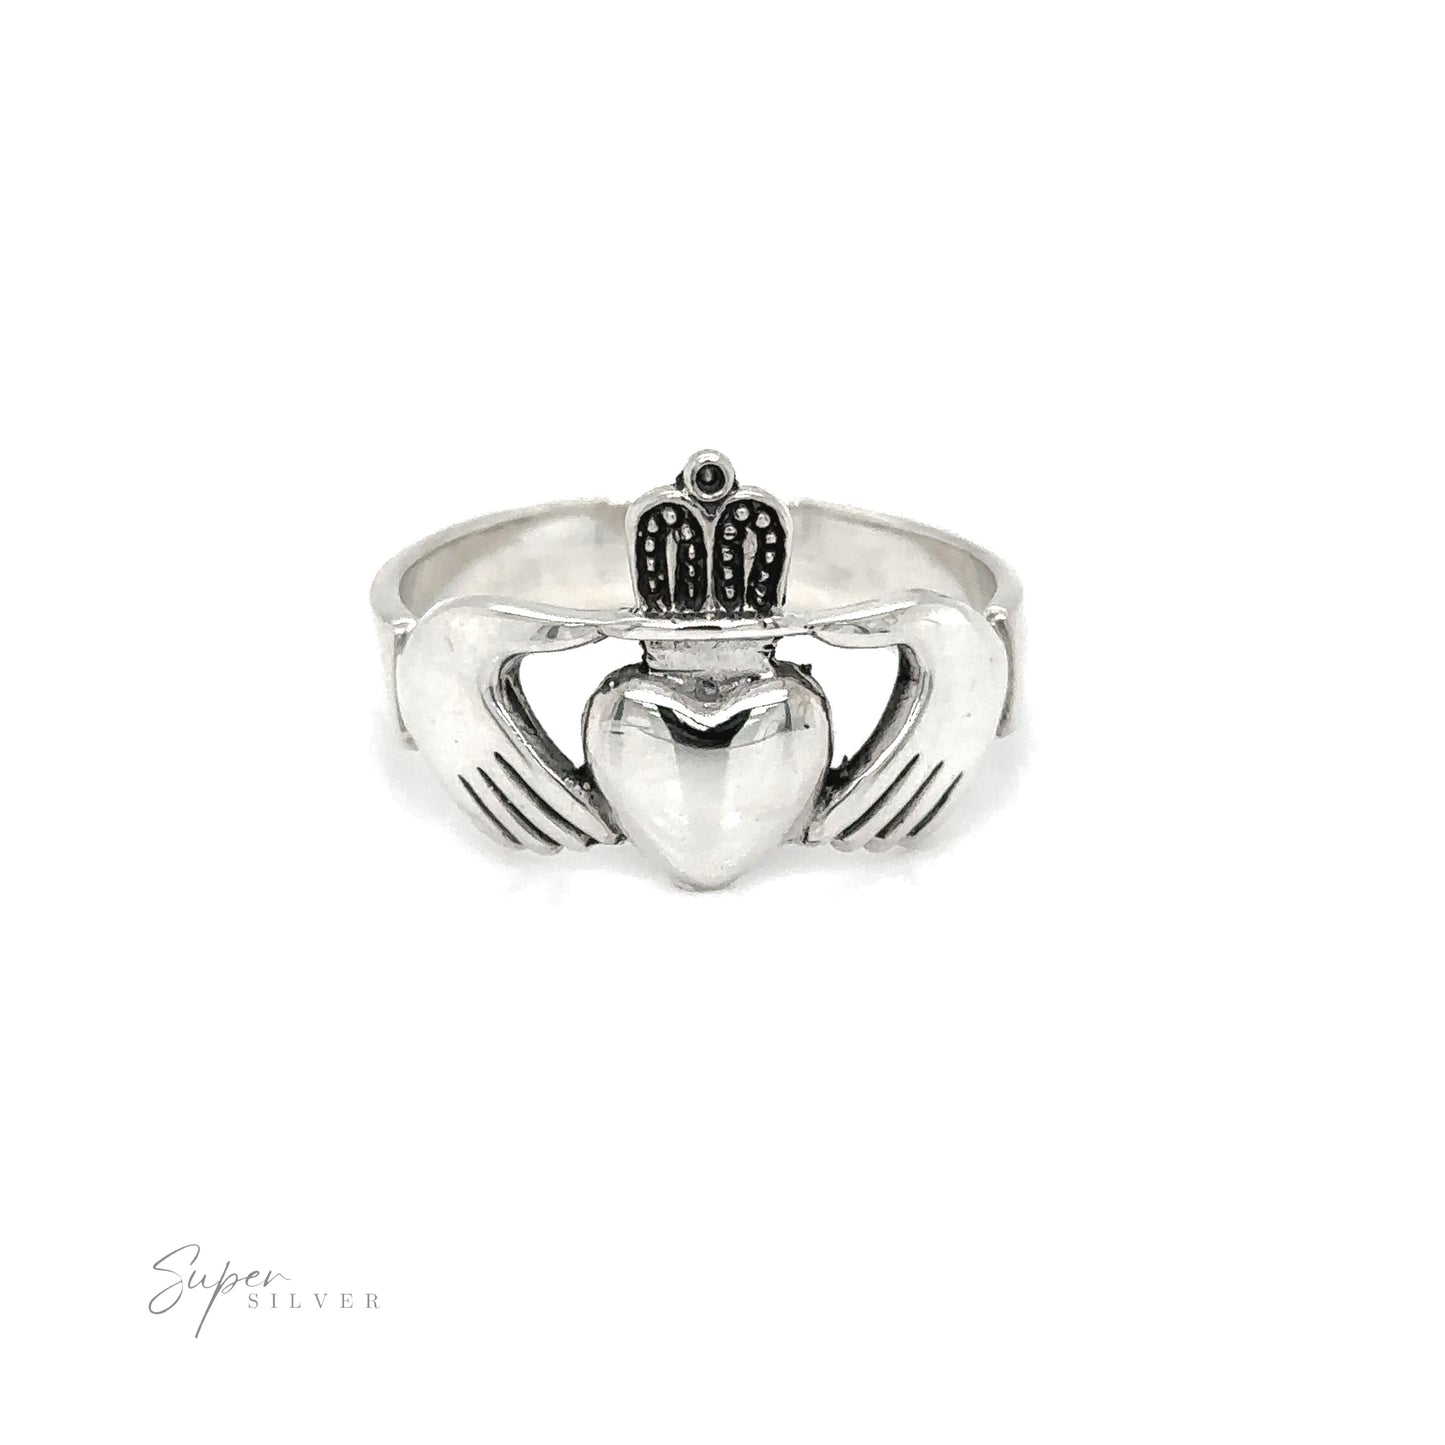 A silver thick claddagh ring symbolizing loyalty and love, with a heart on it.